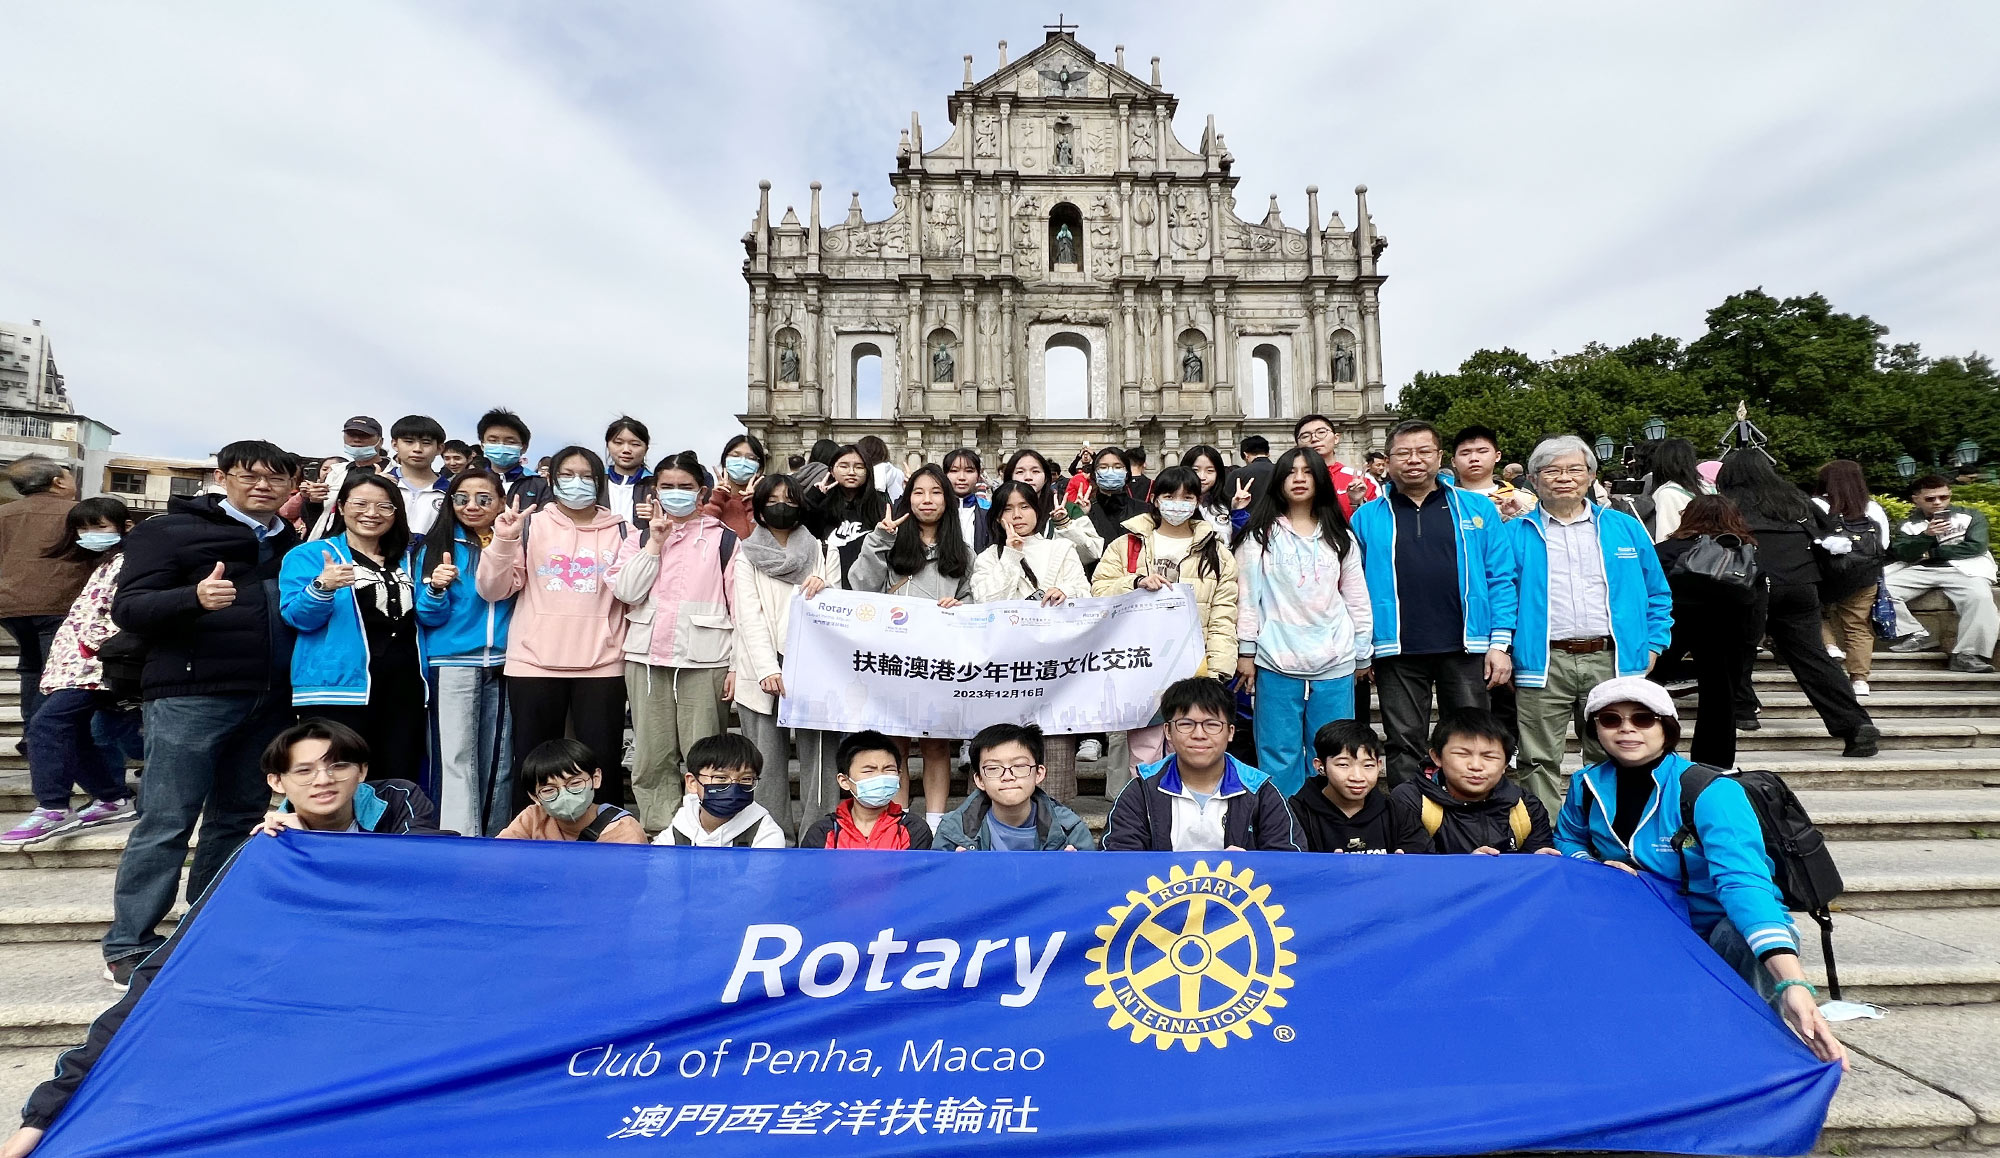 Cover Image - Cultural Exchange Tour for youth by Rotary Club of Penha, Macau 